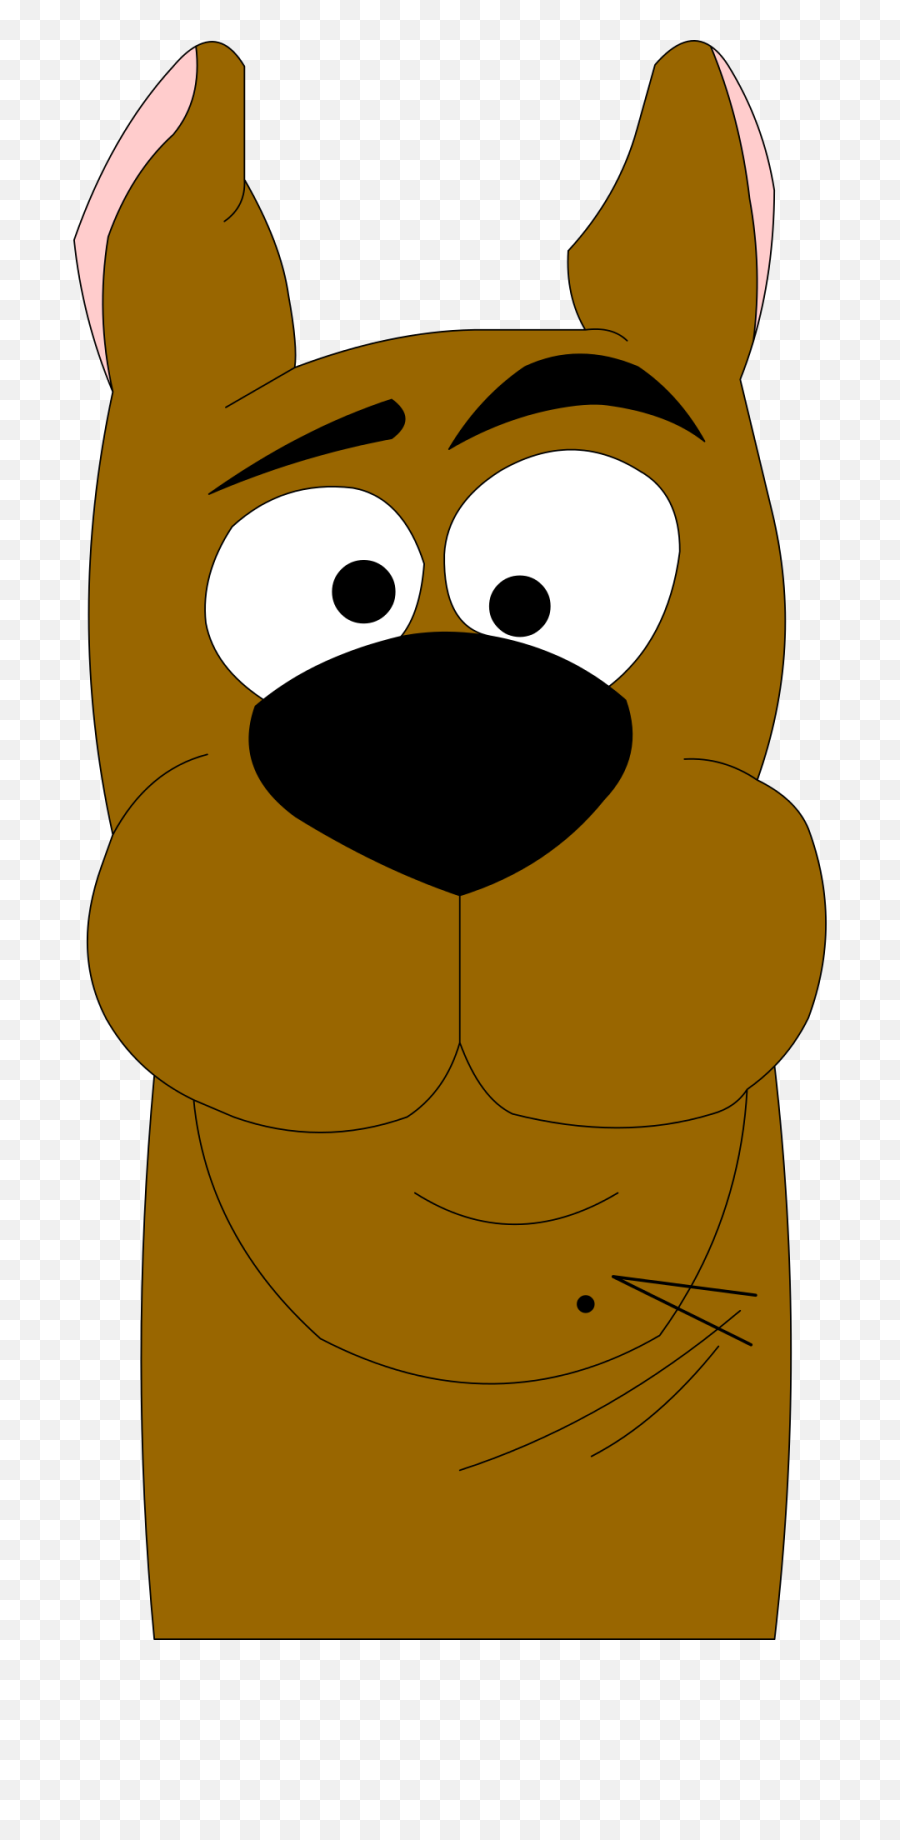 Scooby Doo Dog Png Image - Scooby Doo Clipart,Scooby Doo Png